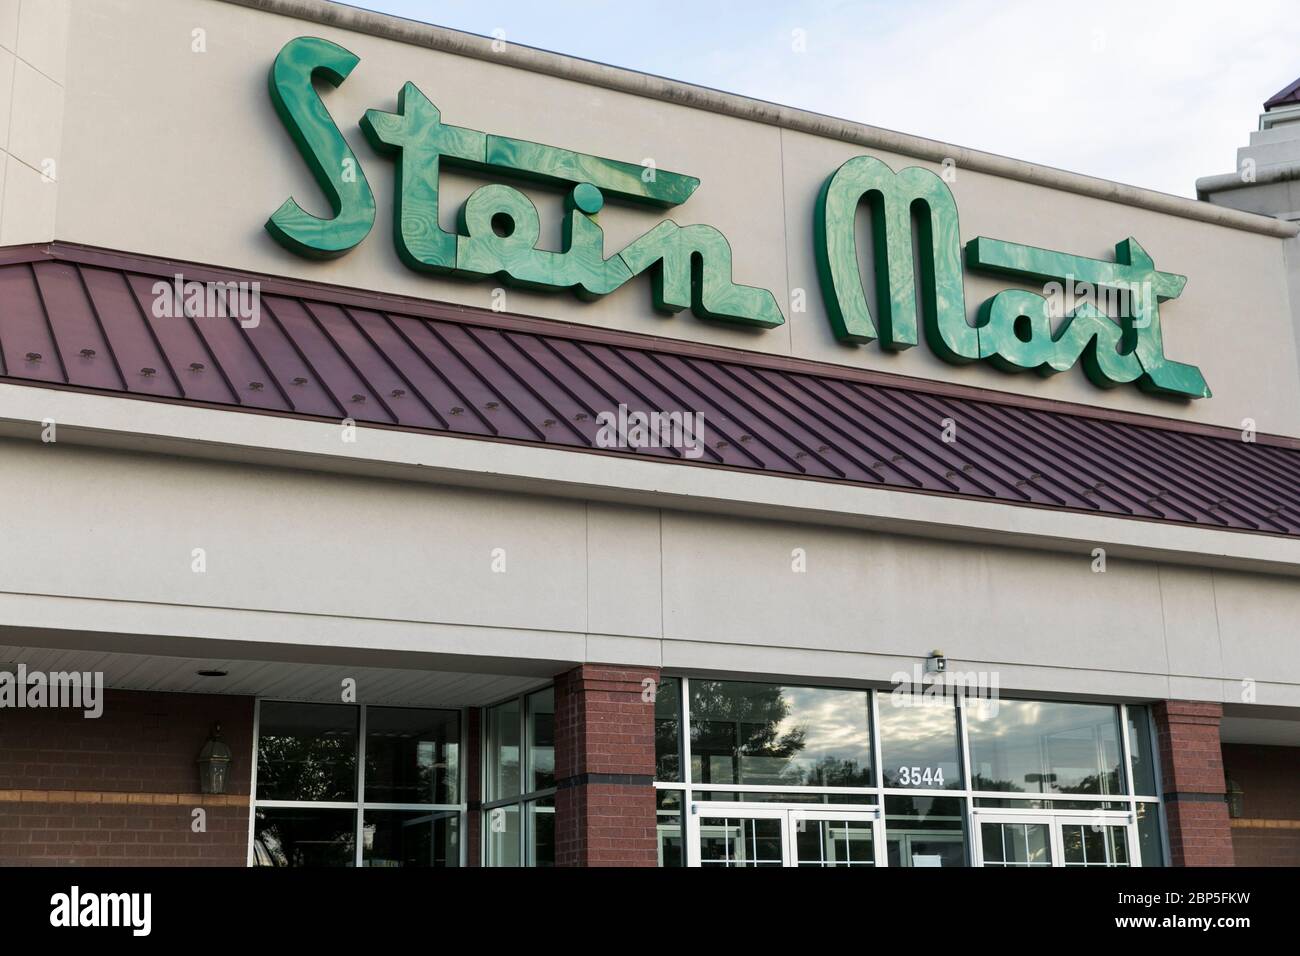 A logo sign outside of a Stein Mart retail store location in Richmond, Virginia on May 13, 2020. Stock Photo